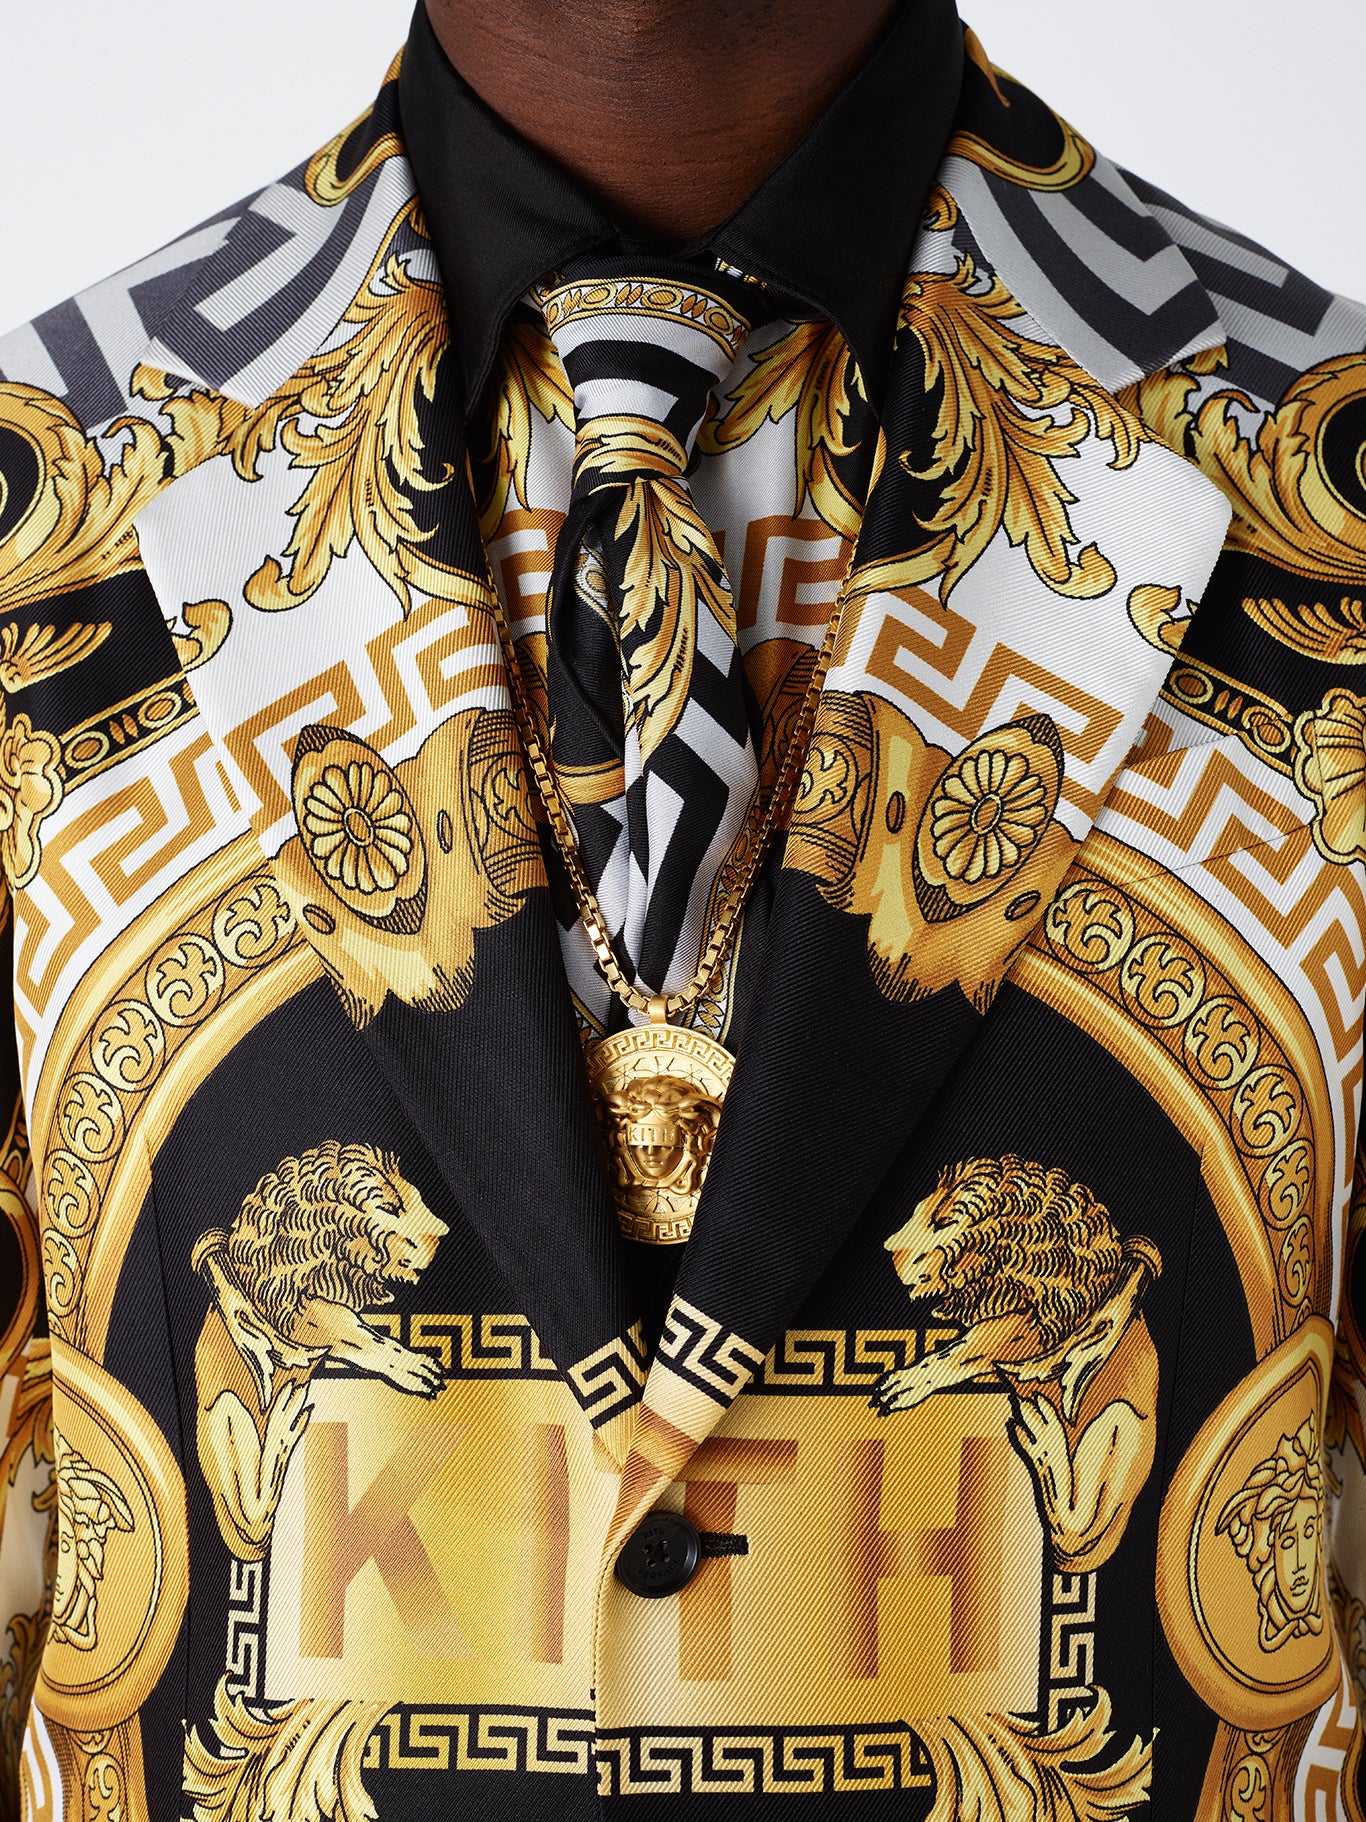 kith versace collection